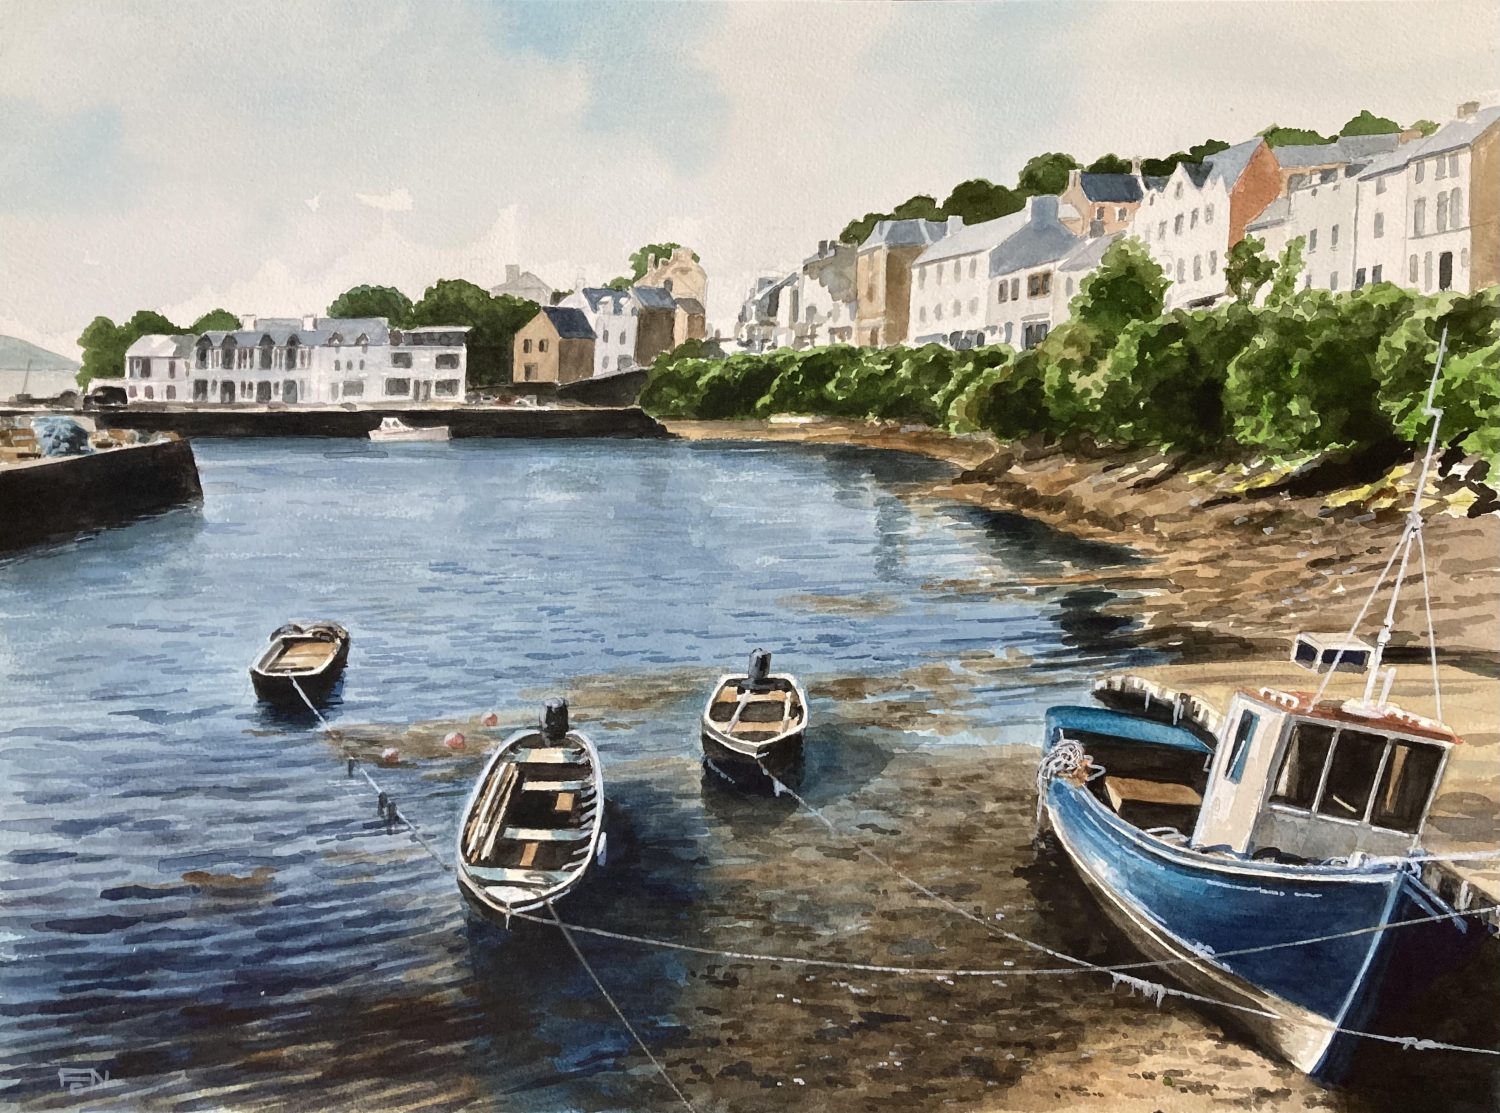 From Roundstone Pier by Arnold Gardiner